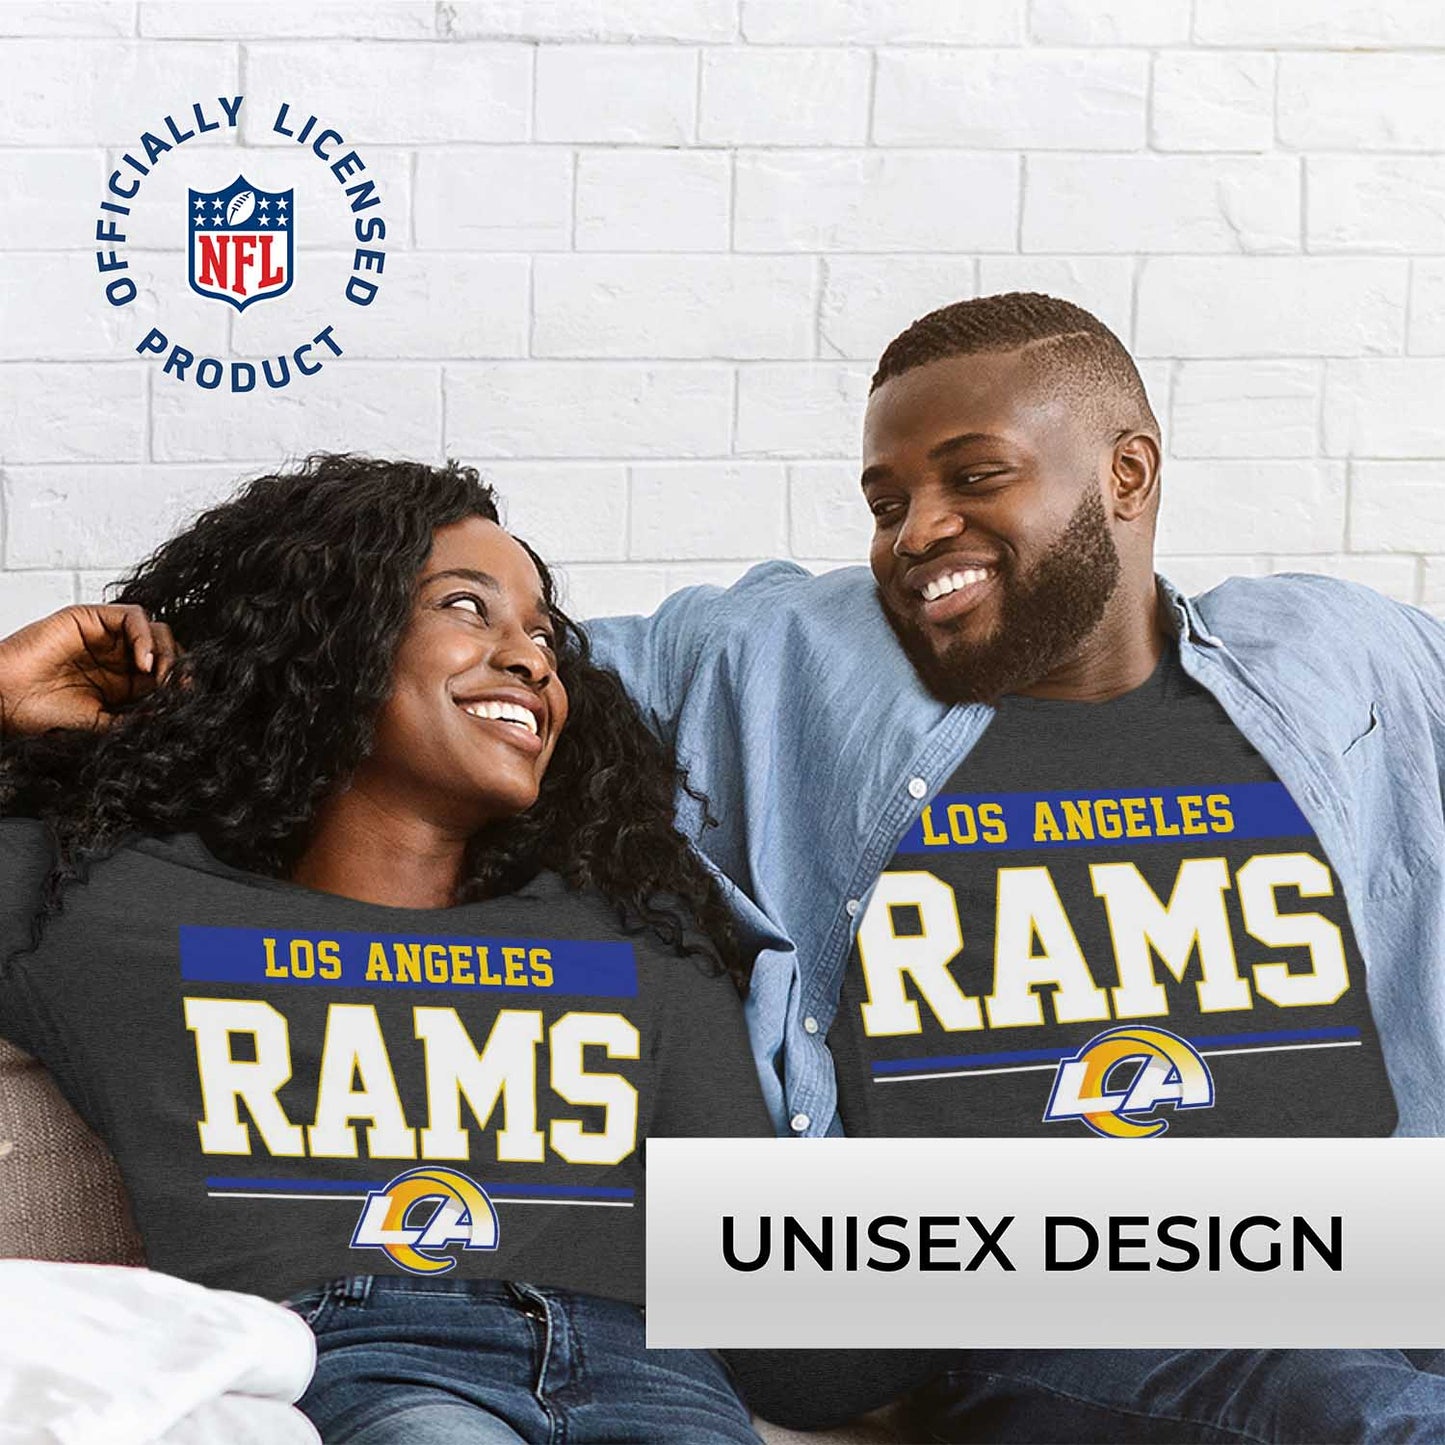 Los Angeles Rams NFL Adult Charcoal Long Sleeve T Shirt - Charcoal